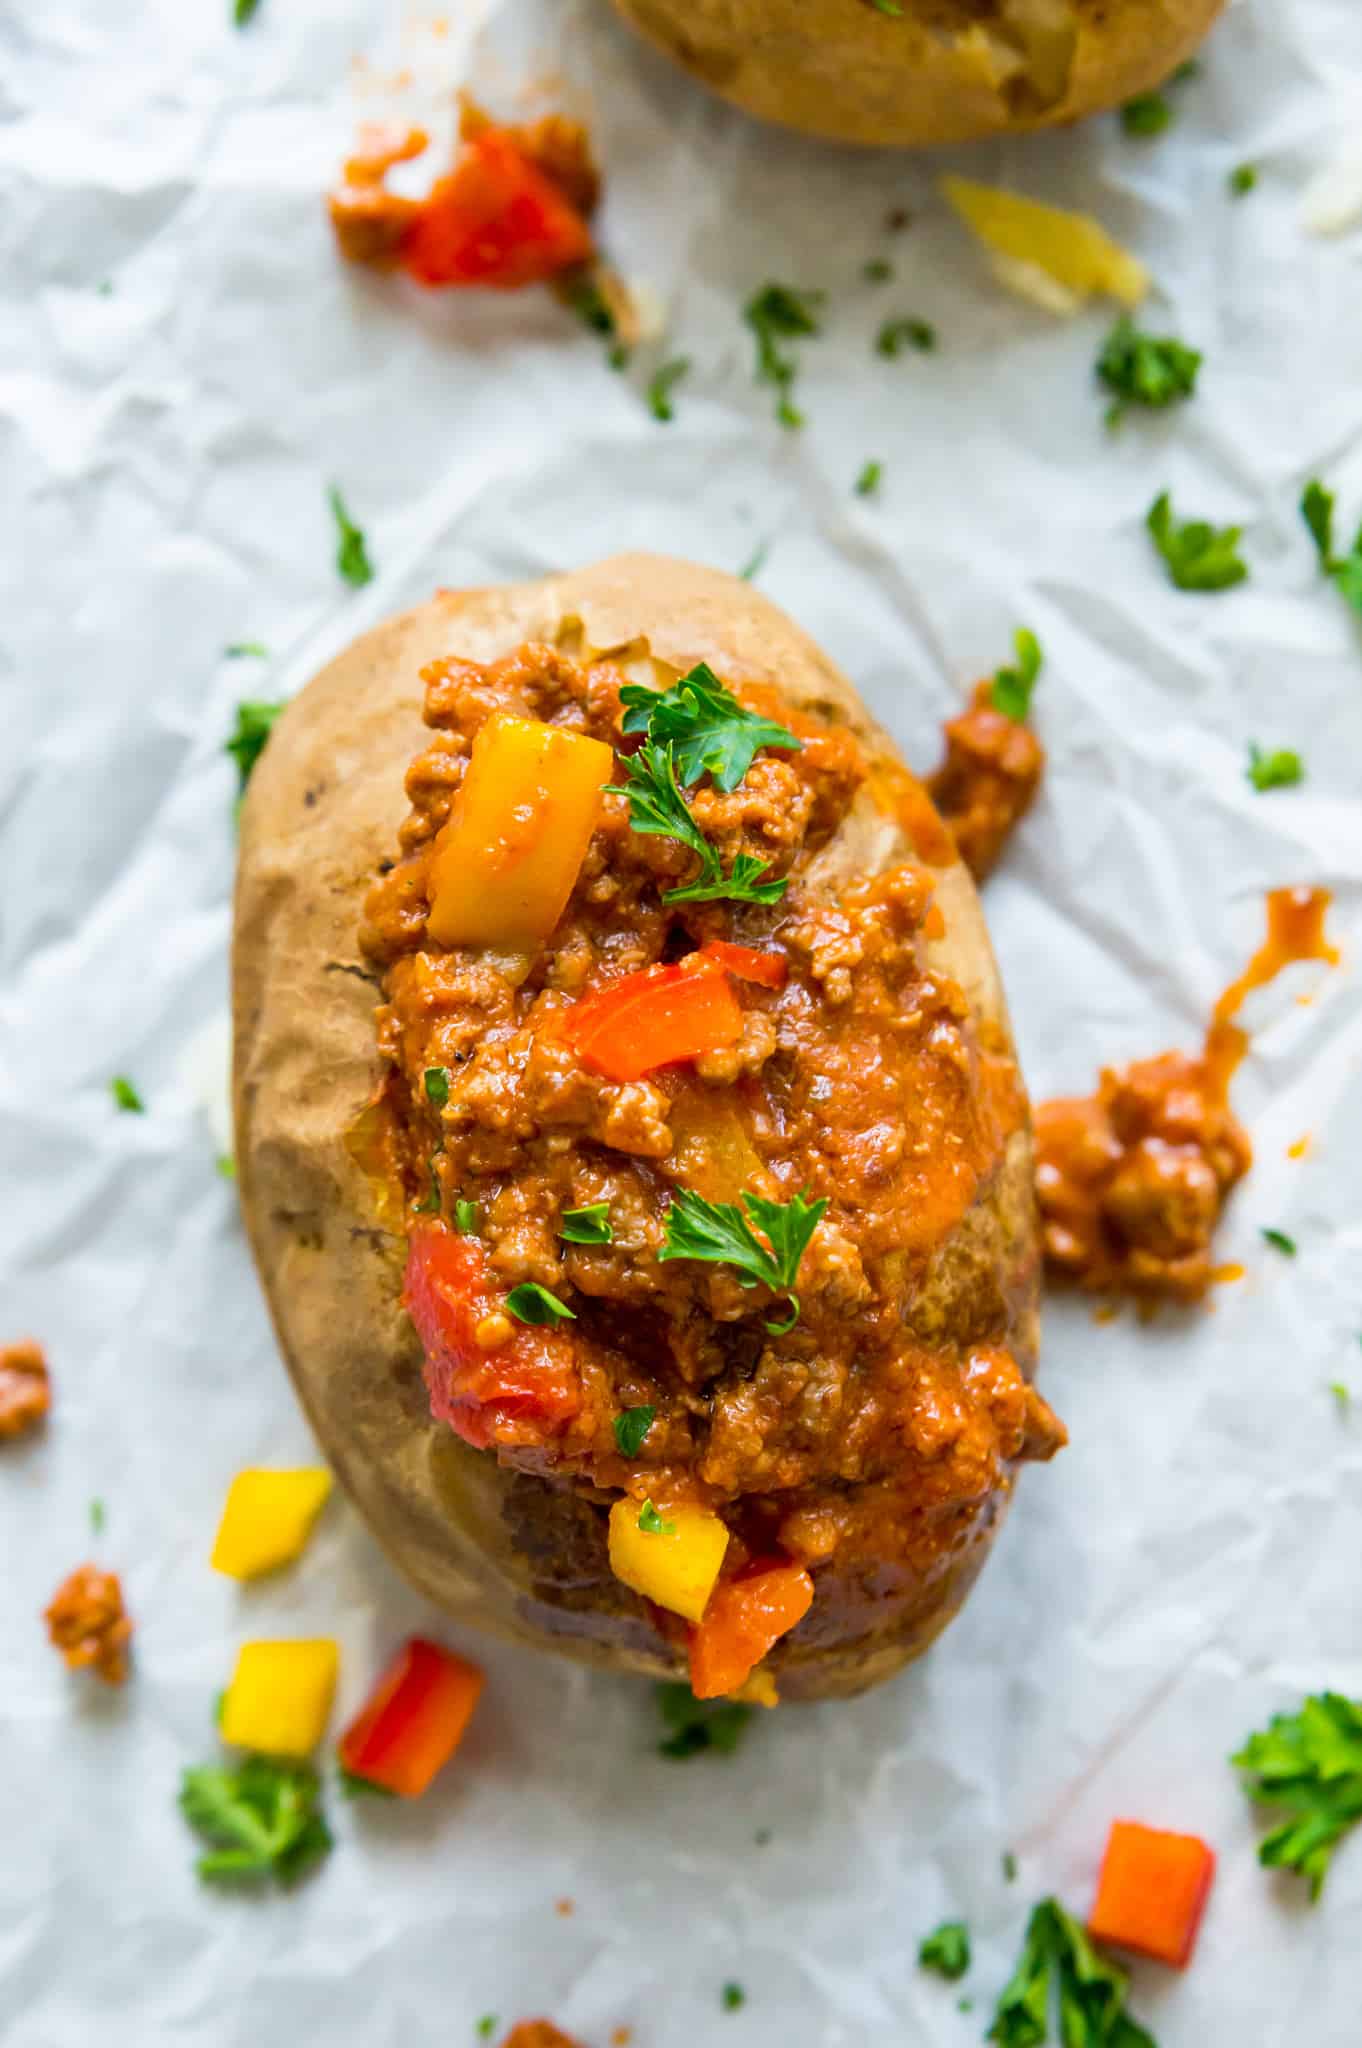 A healthy sloppy Joe on a baked potato garnished with parsley